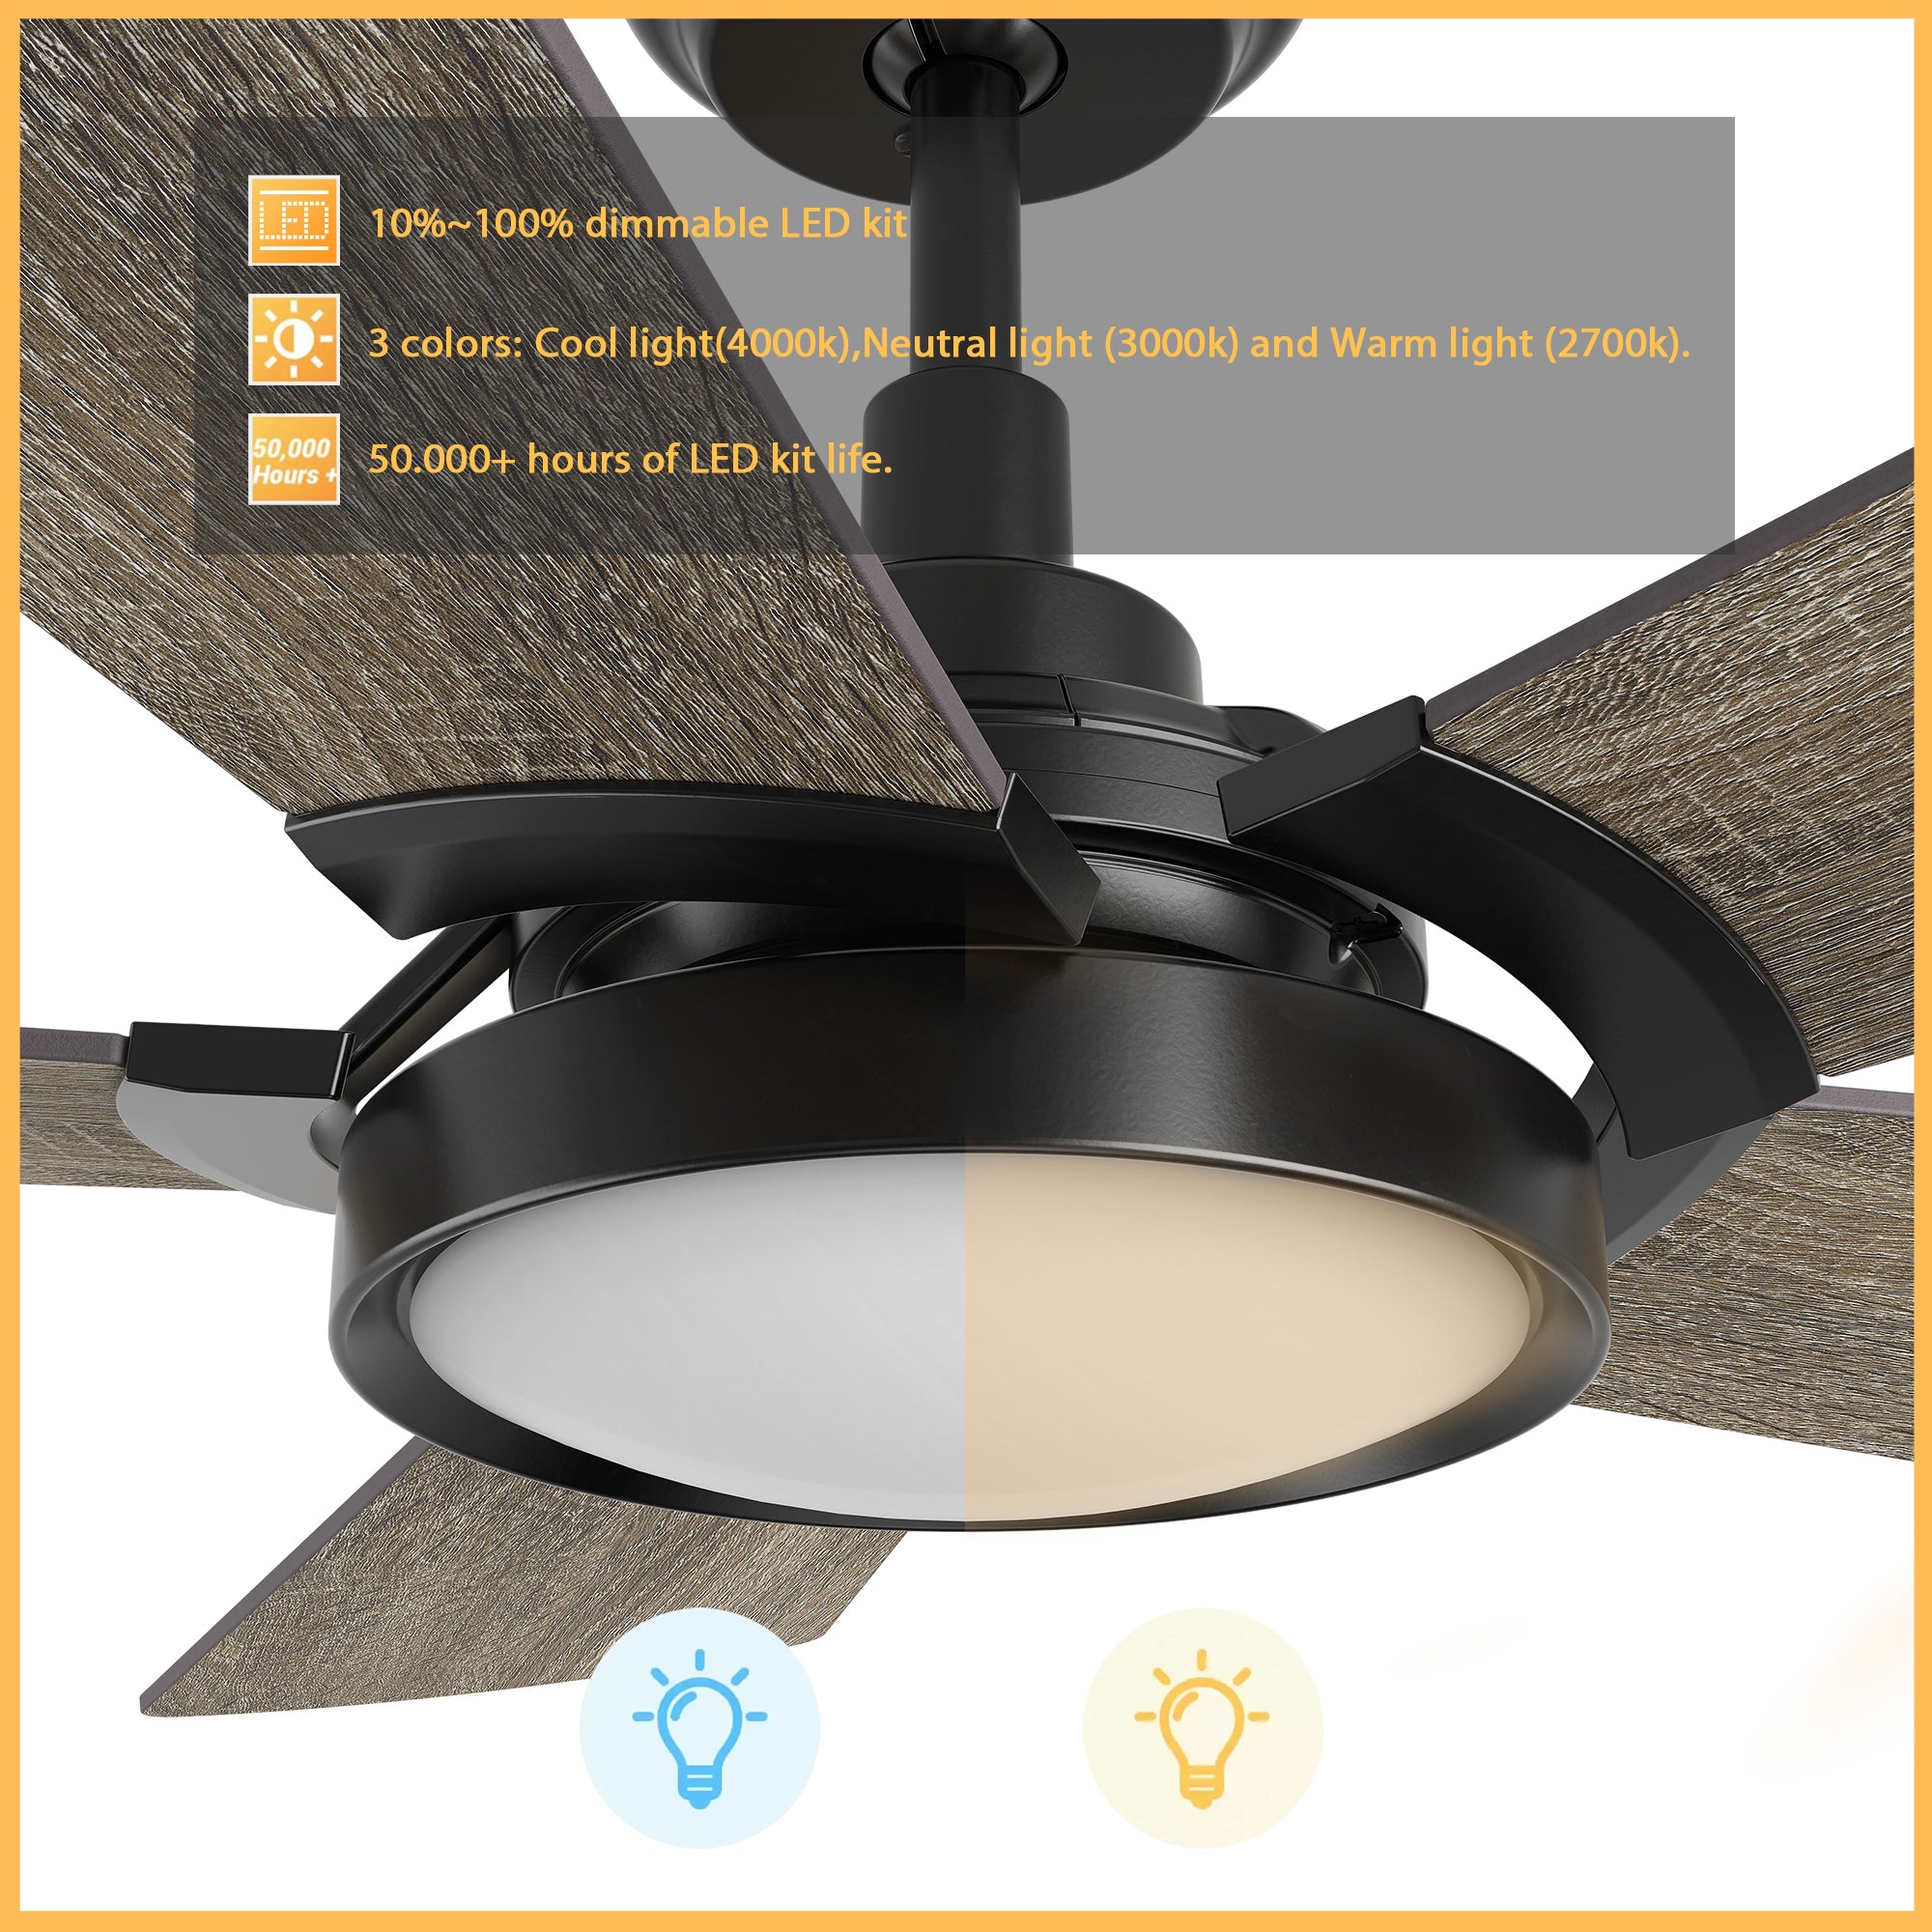 This Wilkes 52&#39;&#39; smart ceiling fan keeps your space cool, bright, and stylish. It is a soft modern masterpiece perfect for your large indoor living spaces. This Wifi smart ceiling fan is a simplicity designing with Black finish, use elegant Plywood blades, Glass shade and has an integrated 4000K LED cool light. The fan features Remote control, Wi-Fi apps, Siri Shortcut and Voice control technology (compatible with Amazon Alexa and Google Home Assistant ) to set fan preferences.